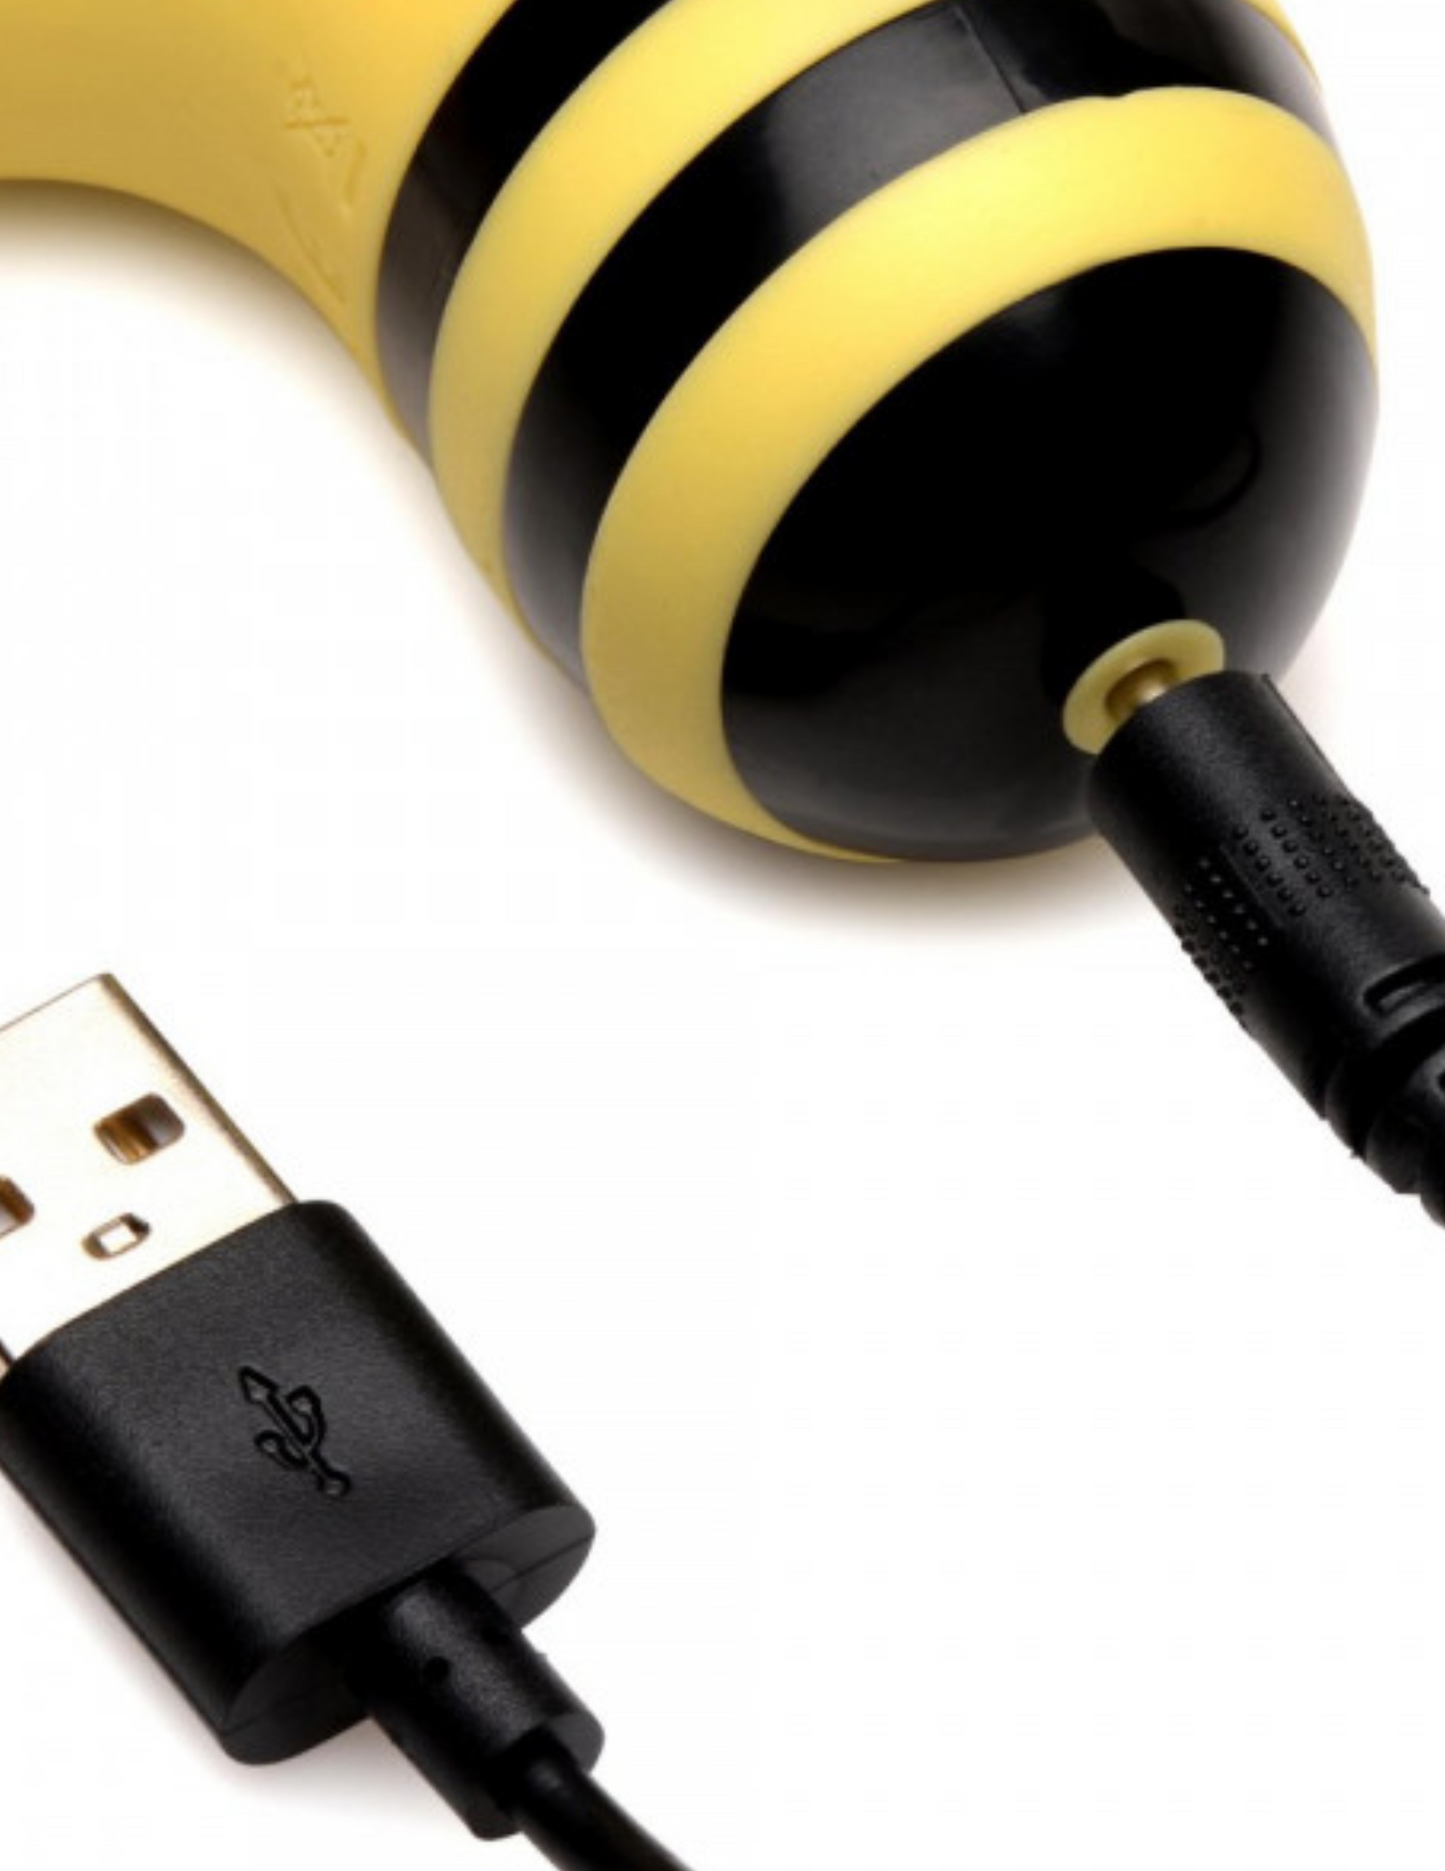 Close-up of the USB charging cord and port on the Shegasm Sucky Bee Finger Vibe from XR Brands.